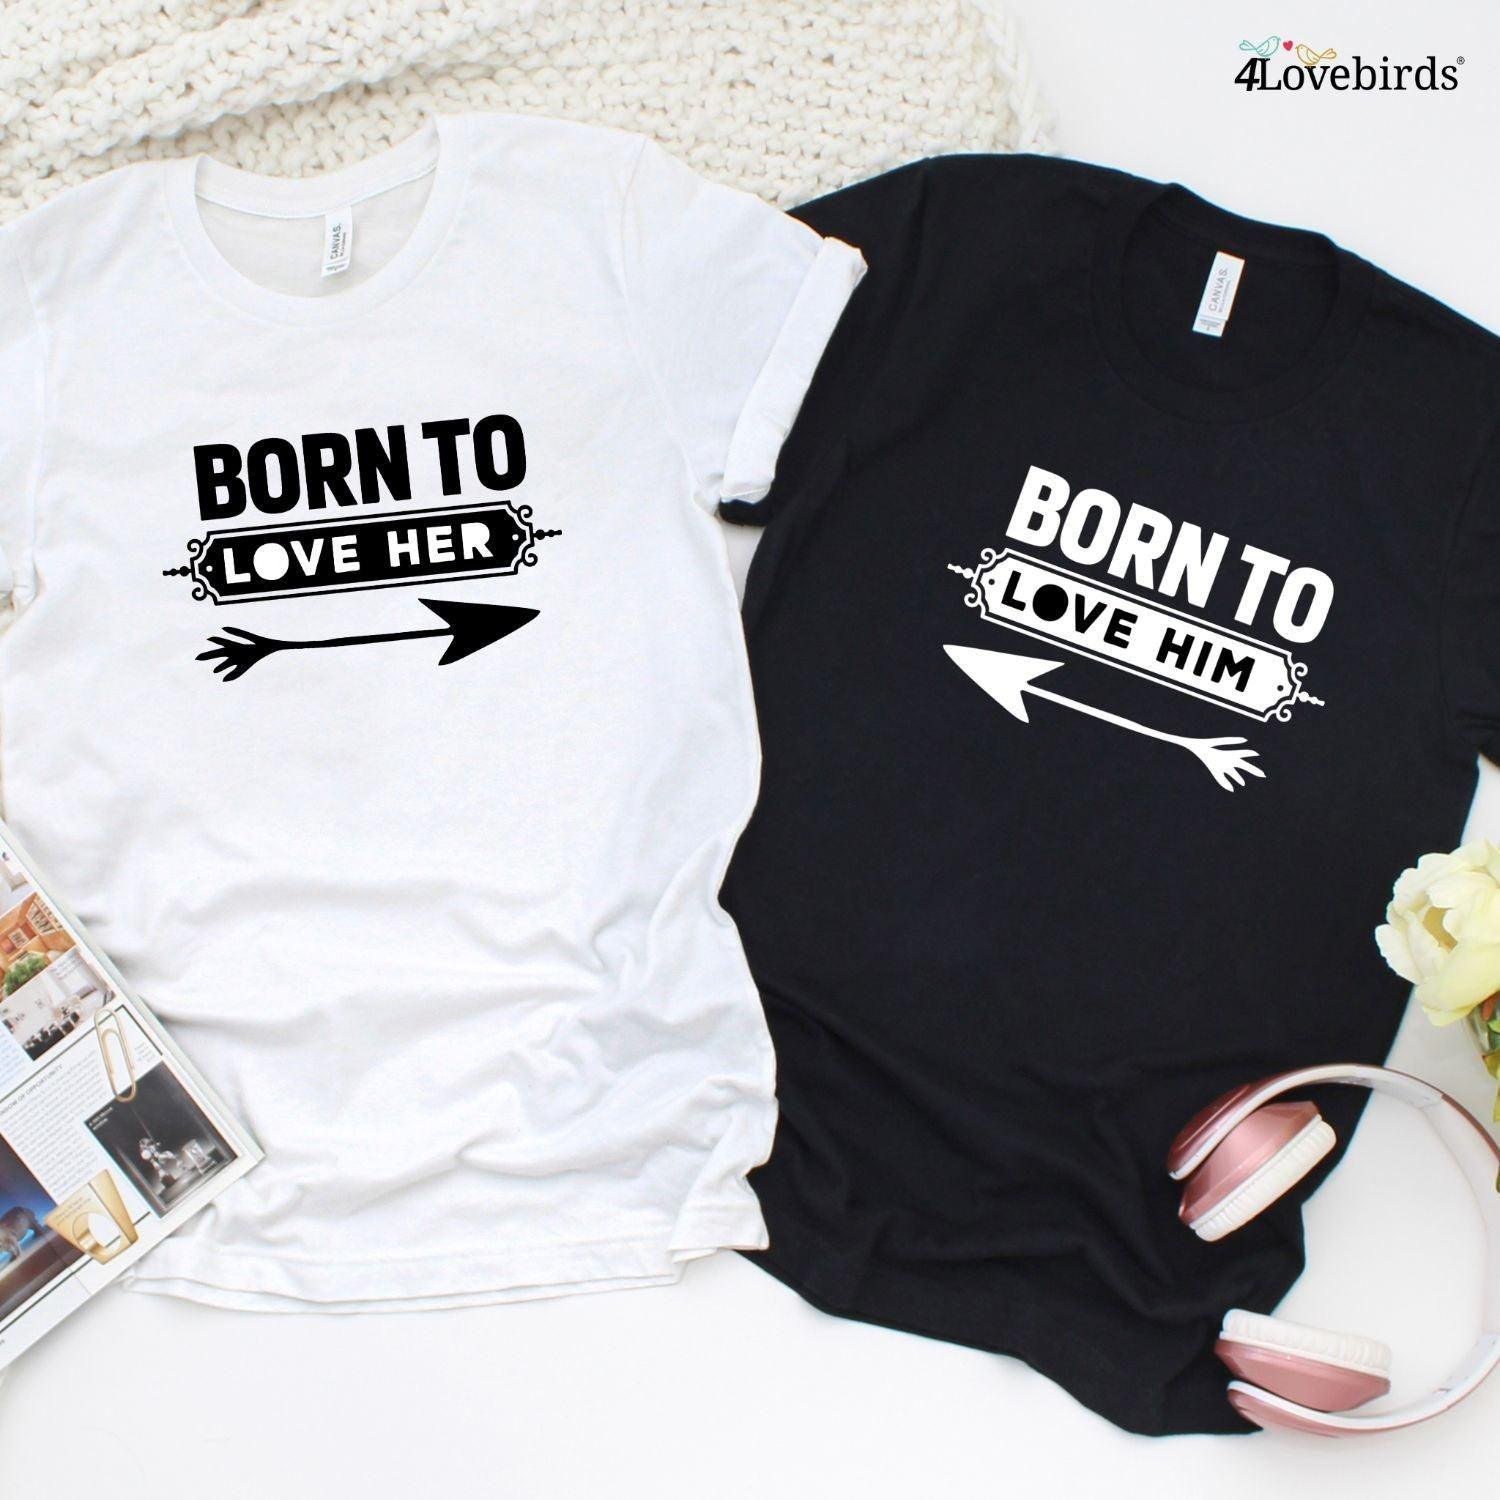 Couples' Born to Love Him/Her Matching Outfits Set for Picture-Perfect Memories - 4Lovebirds